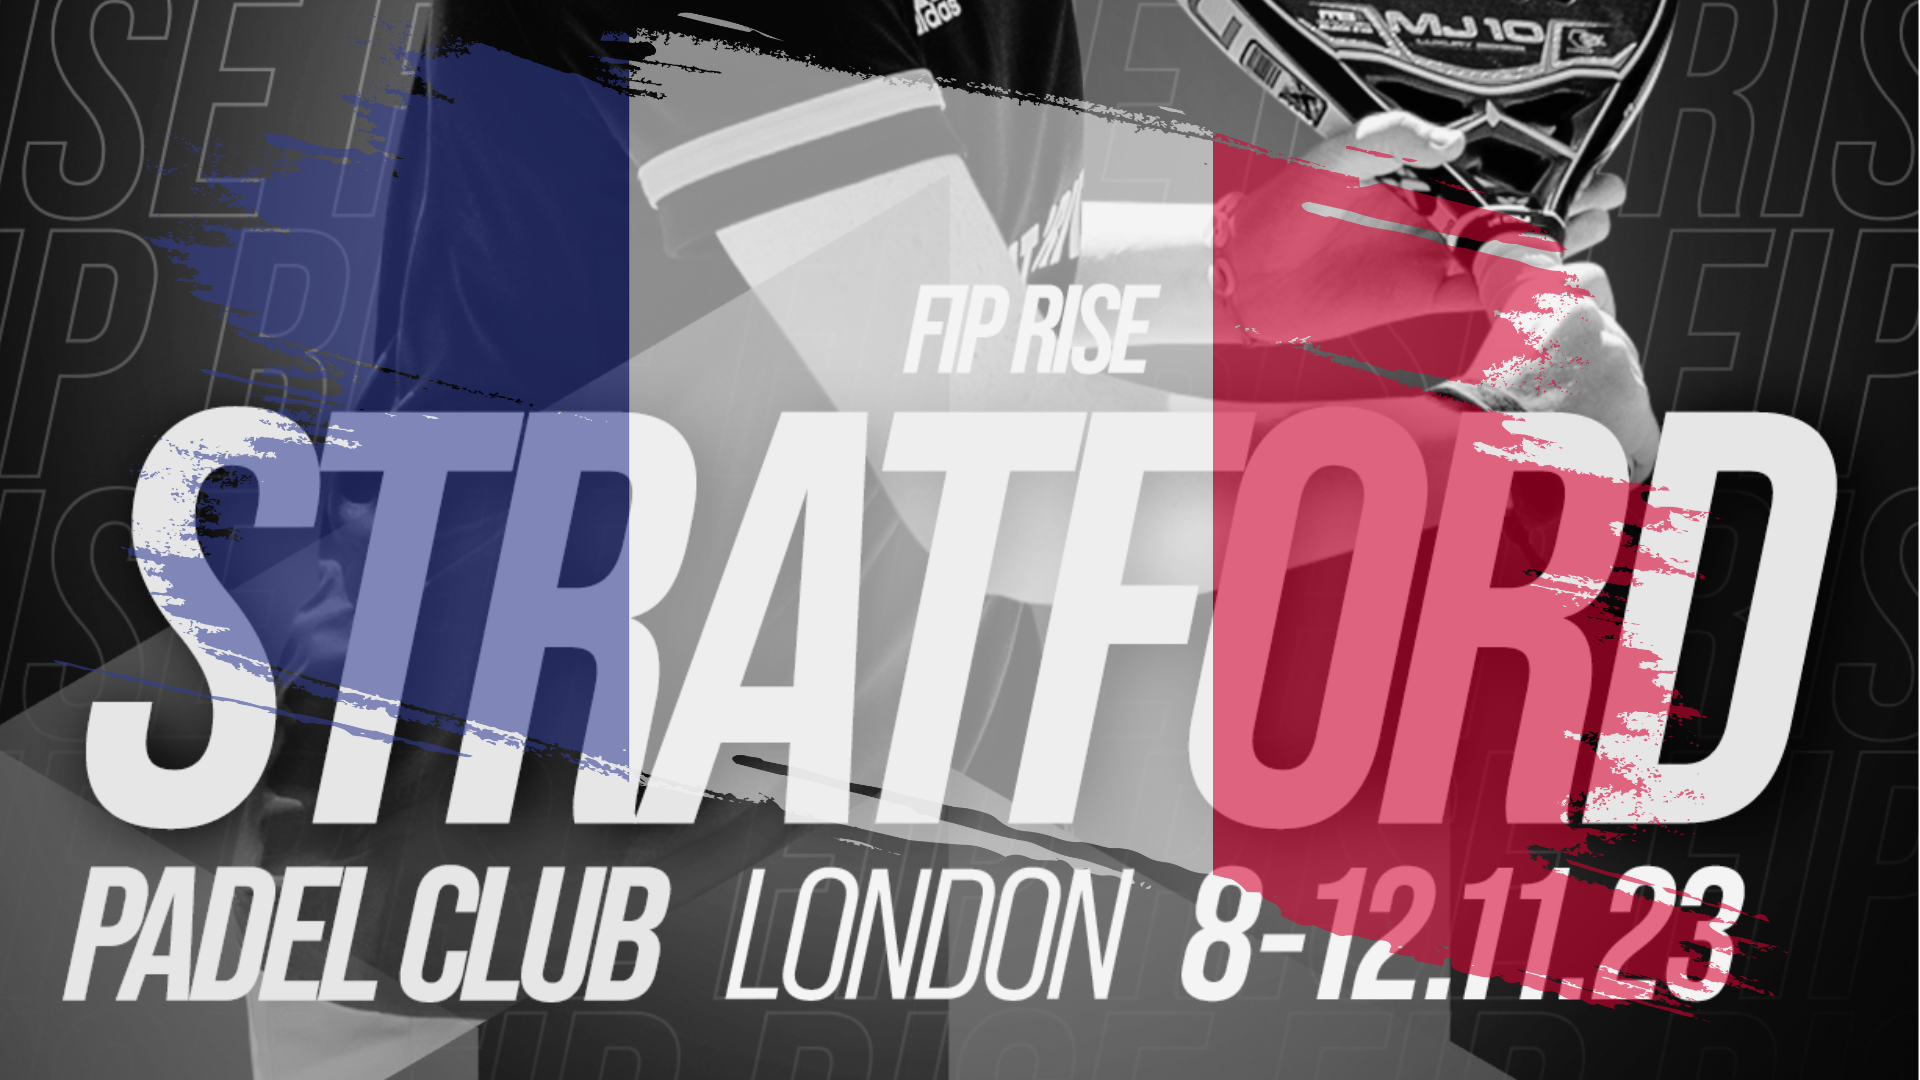 FIP Rise Stratford – Five French people on the slopes this Thursday